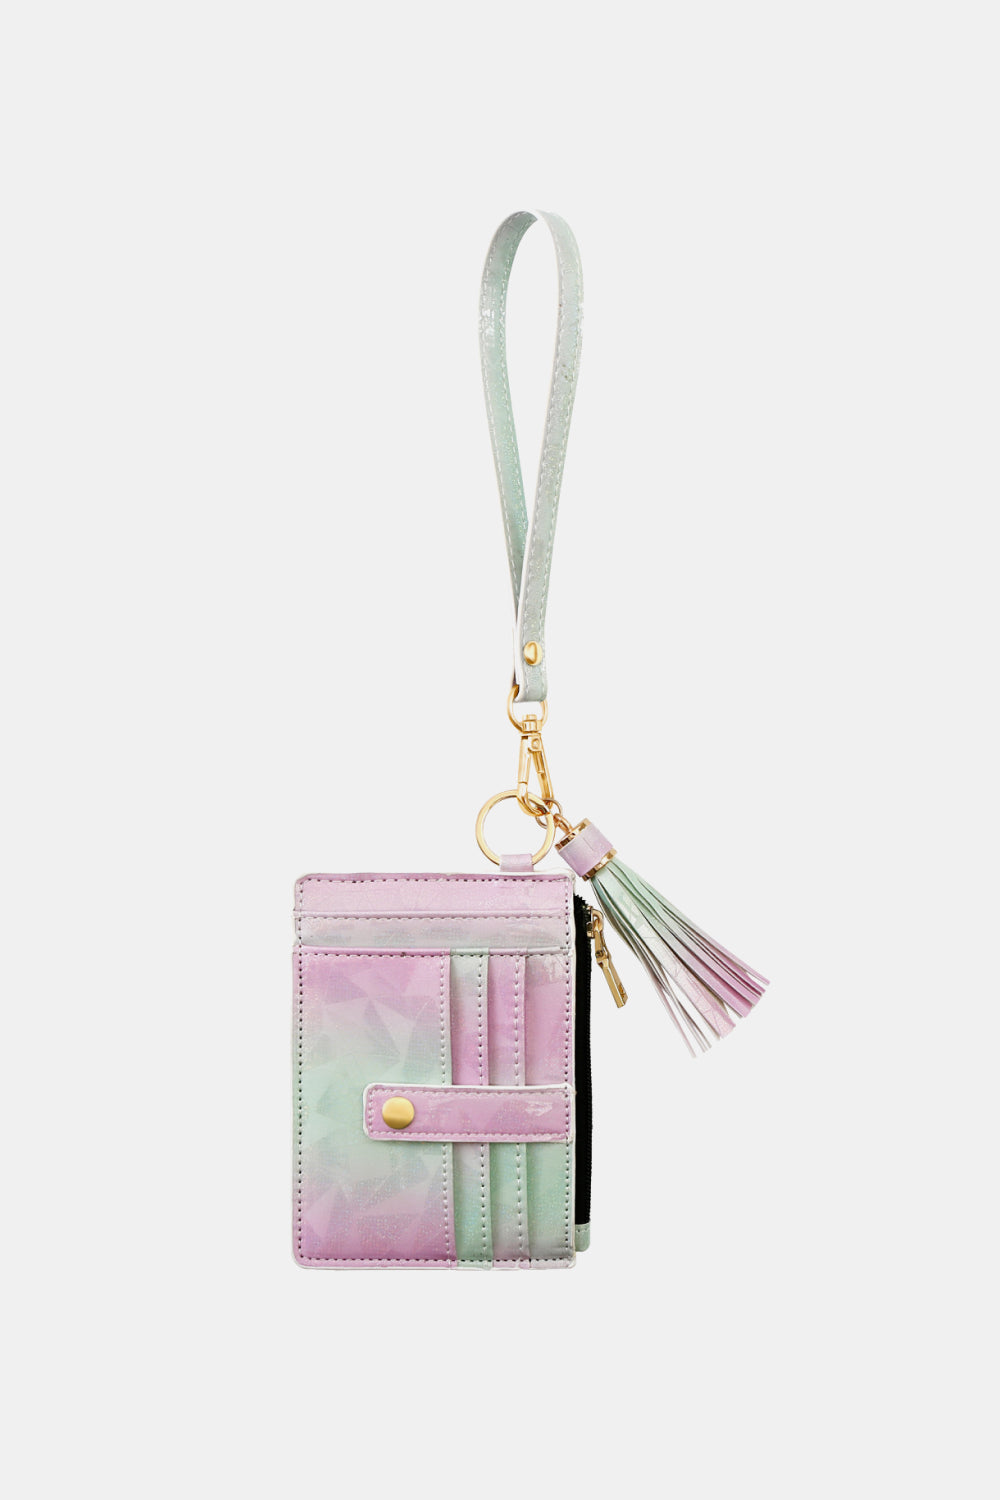 Trendsi Cupid Beauty Supplies Lilac / One Size Keychains Printed Tassel Keychain with Wallet